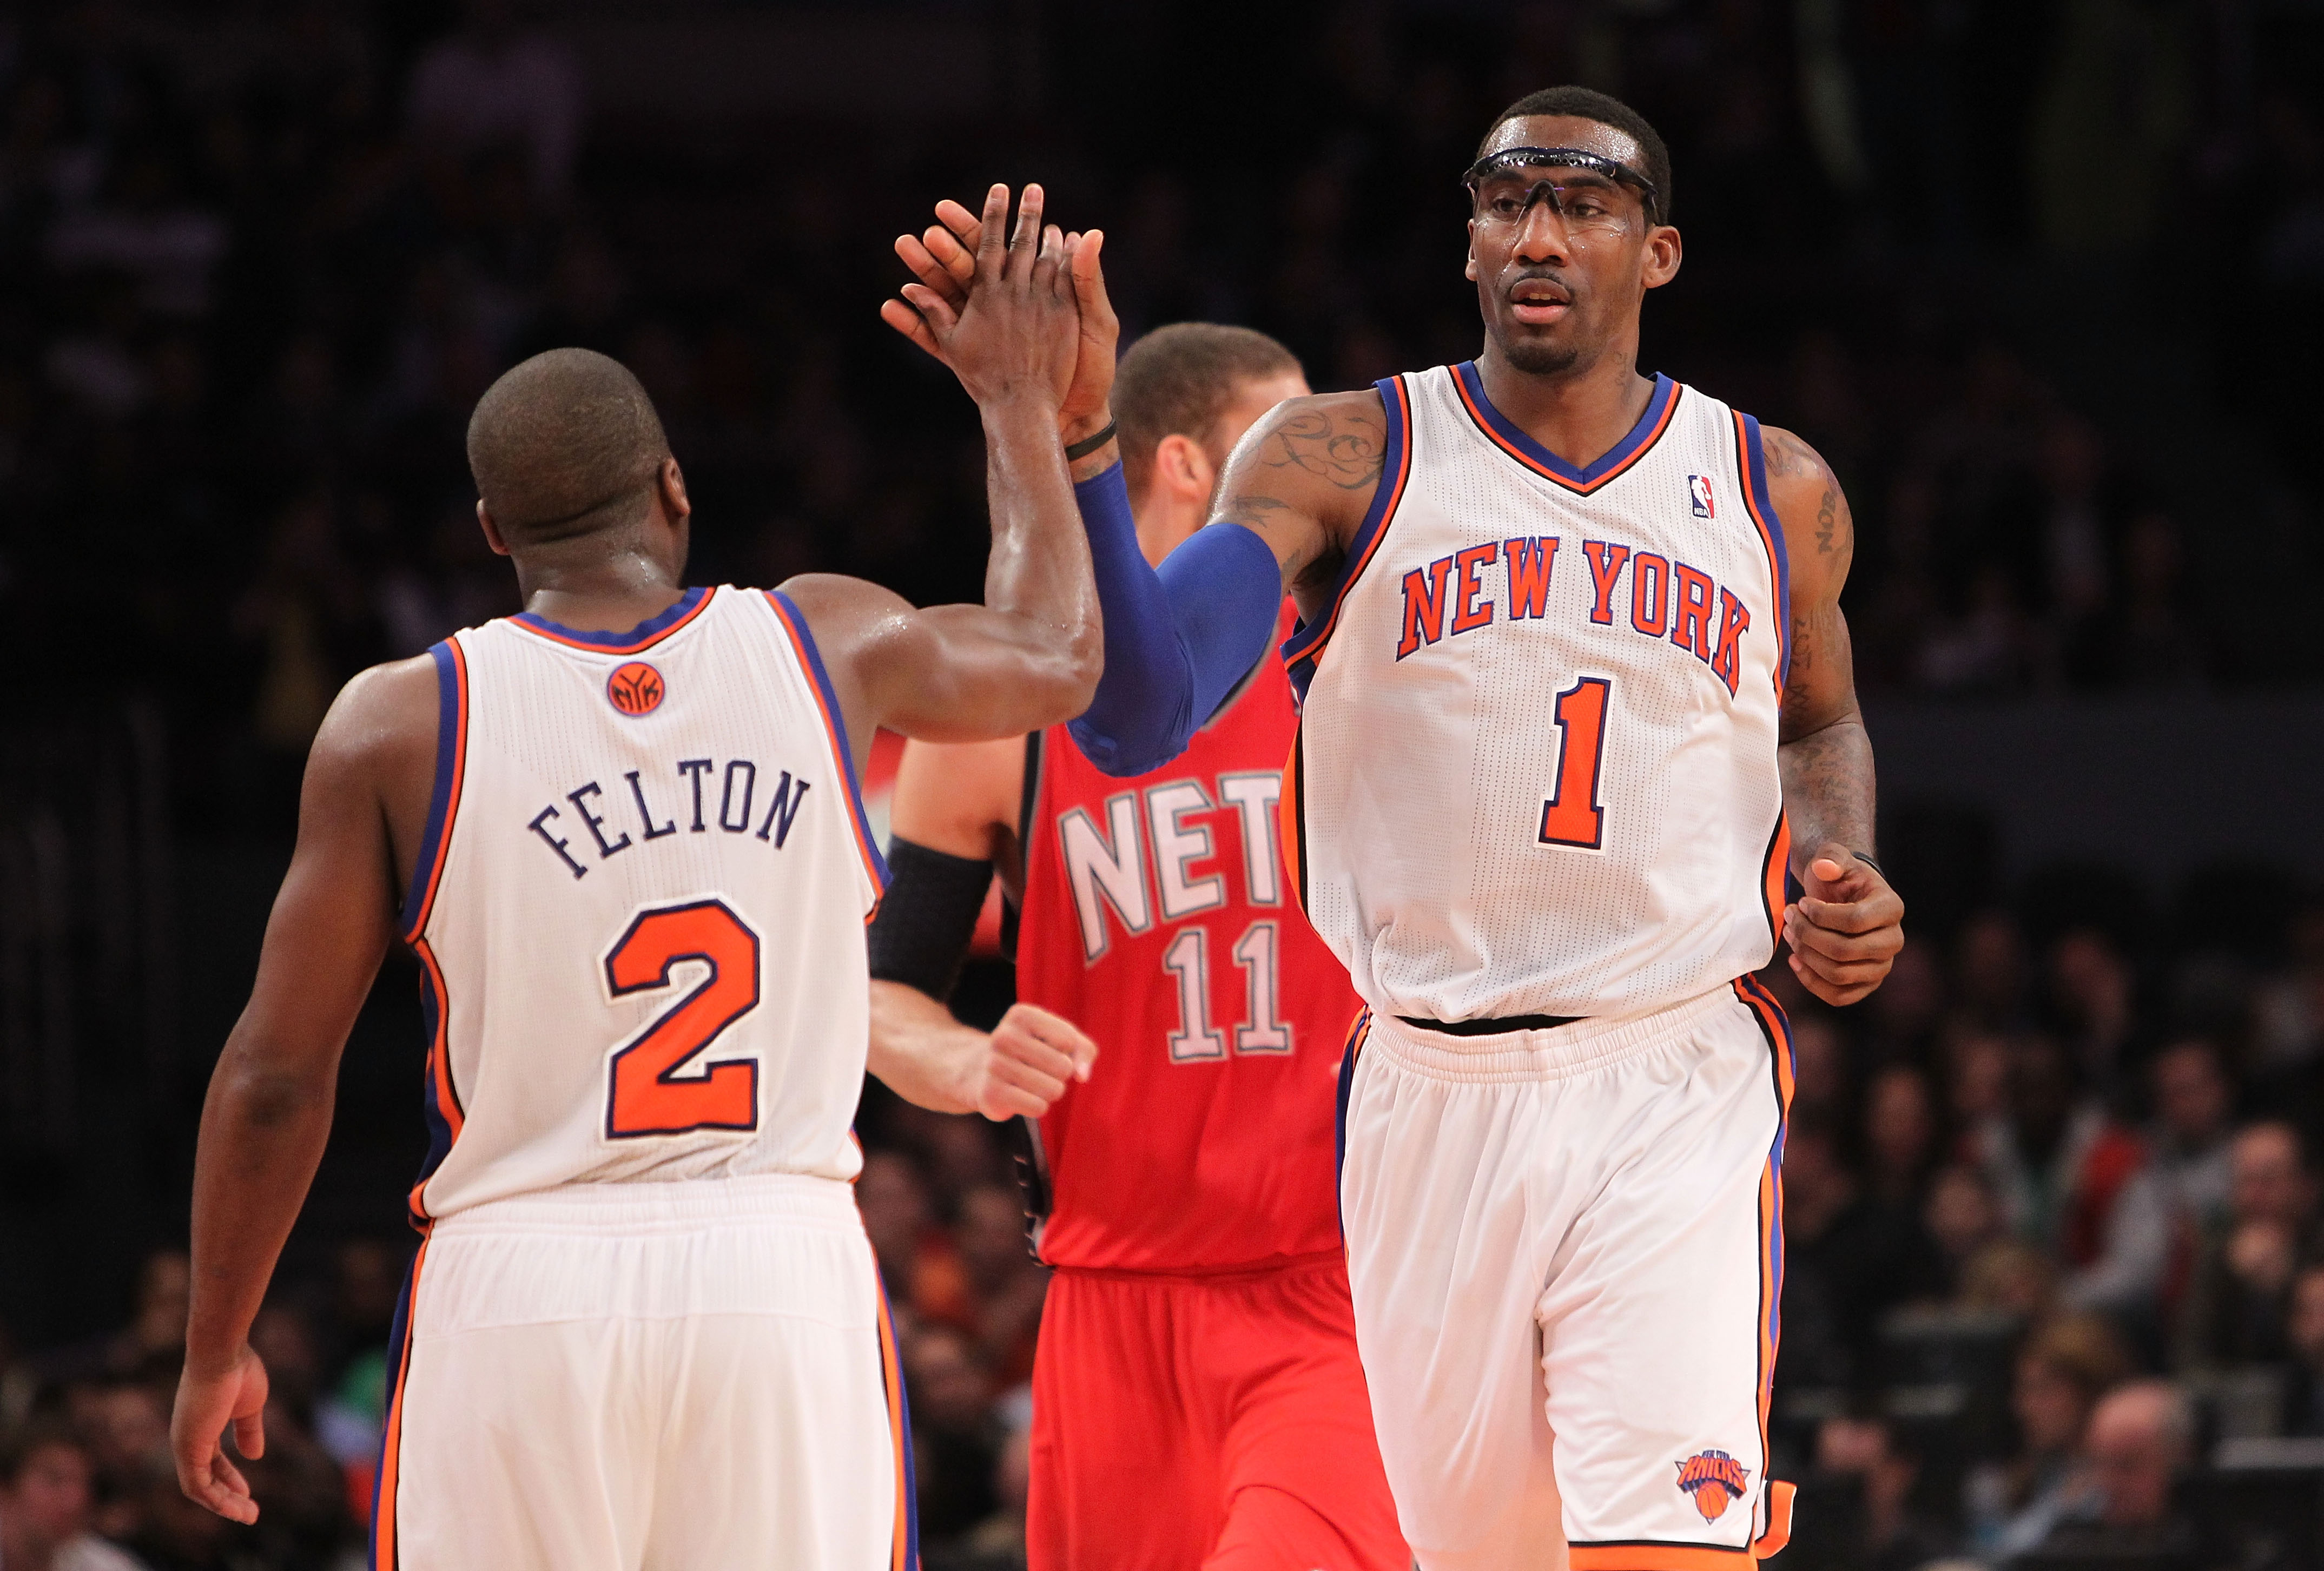 Amar'e Stoudemire and Raymond Felton reunited and it feels so good 